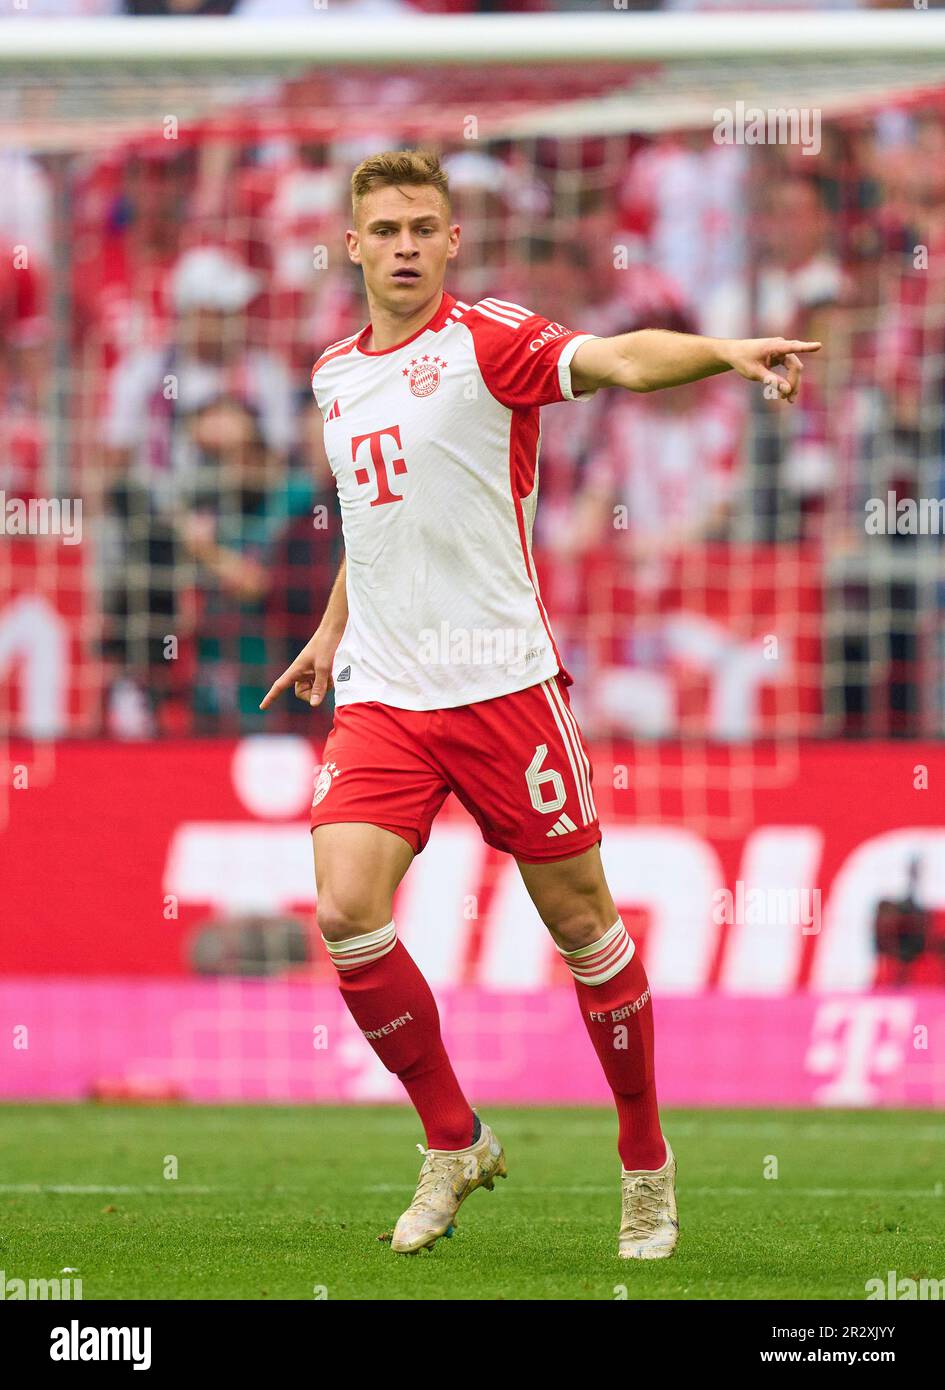 Joshua KIMMICH, FCB 6   in the match FC BAYERN MUENCHEN - RB LEIPZIG 1-3 1.German Football League on May 20, 2023 in Munich, Germany. Season 2022/2023, matchday 33, 1.Bundesliga, FCB, München, 33.Spieltag. © Peter Schatz / Alamy Live News    - DFL REGULATIONS PROHIBIT ANY USE OF PHOTOGRAPHS as IMAGE SEQUENCES and/or QUASI-VIDEO - Stock Photo